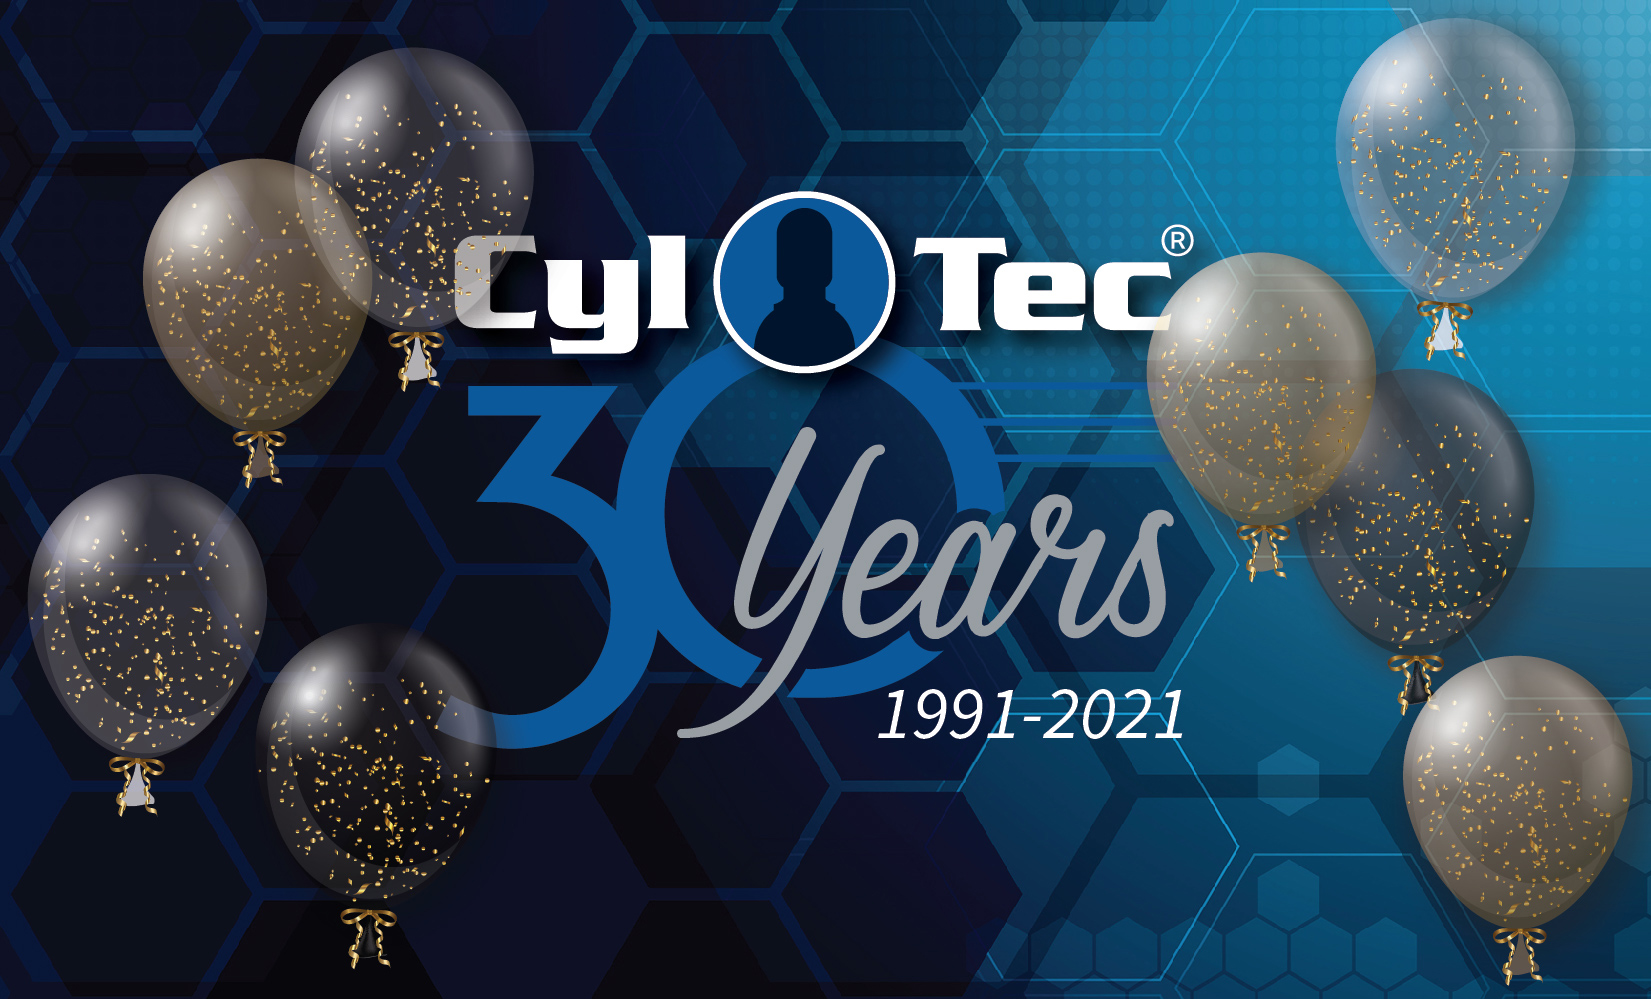 Cyl-Tec Hits a New Milestone – Our 30-year Anniversary!